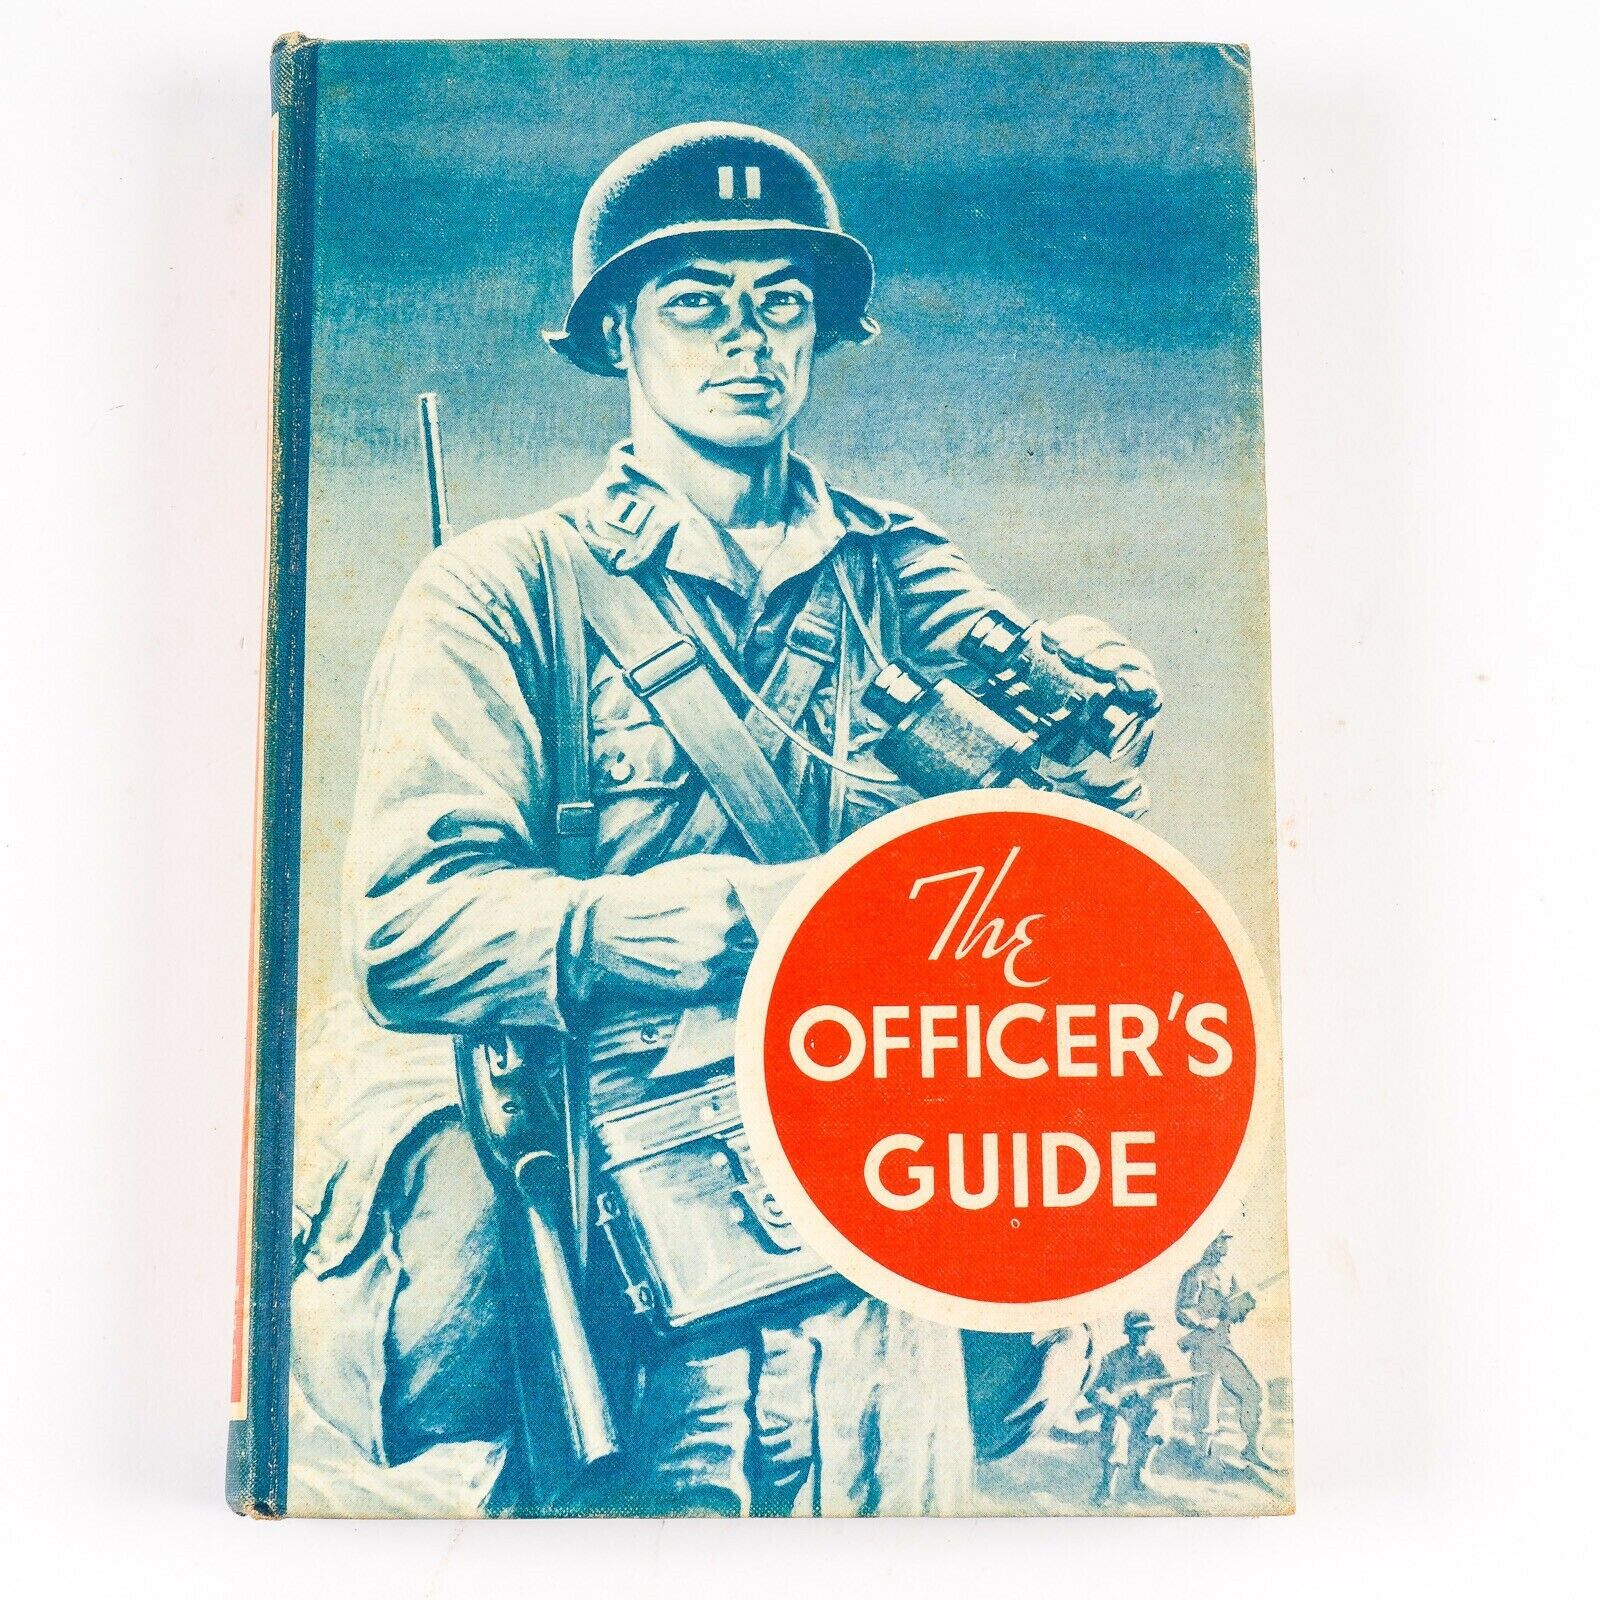 1957 The Officer\'s Guide 23rd Edition United States Army Military Service Pub.